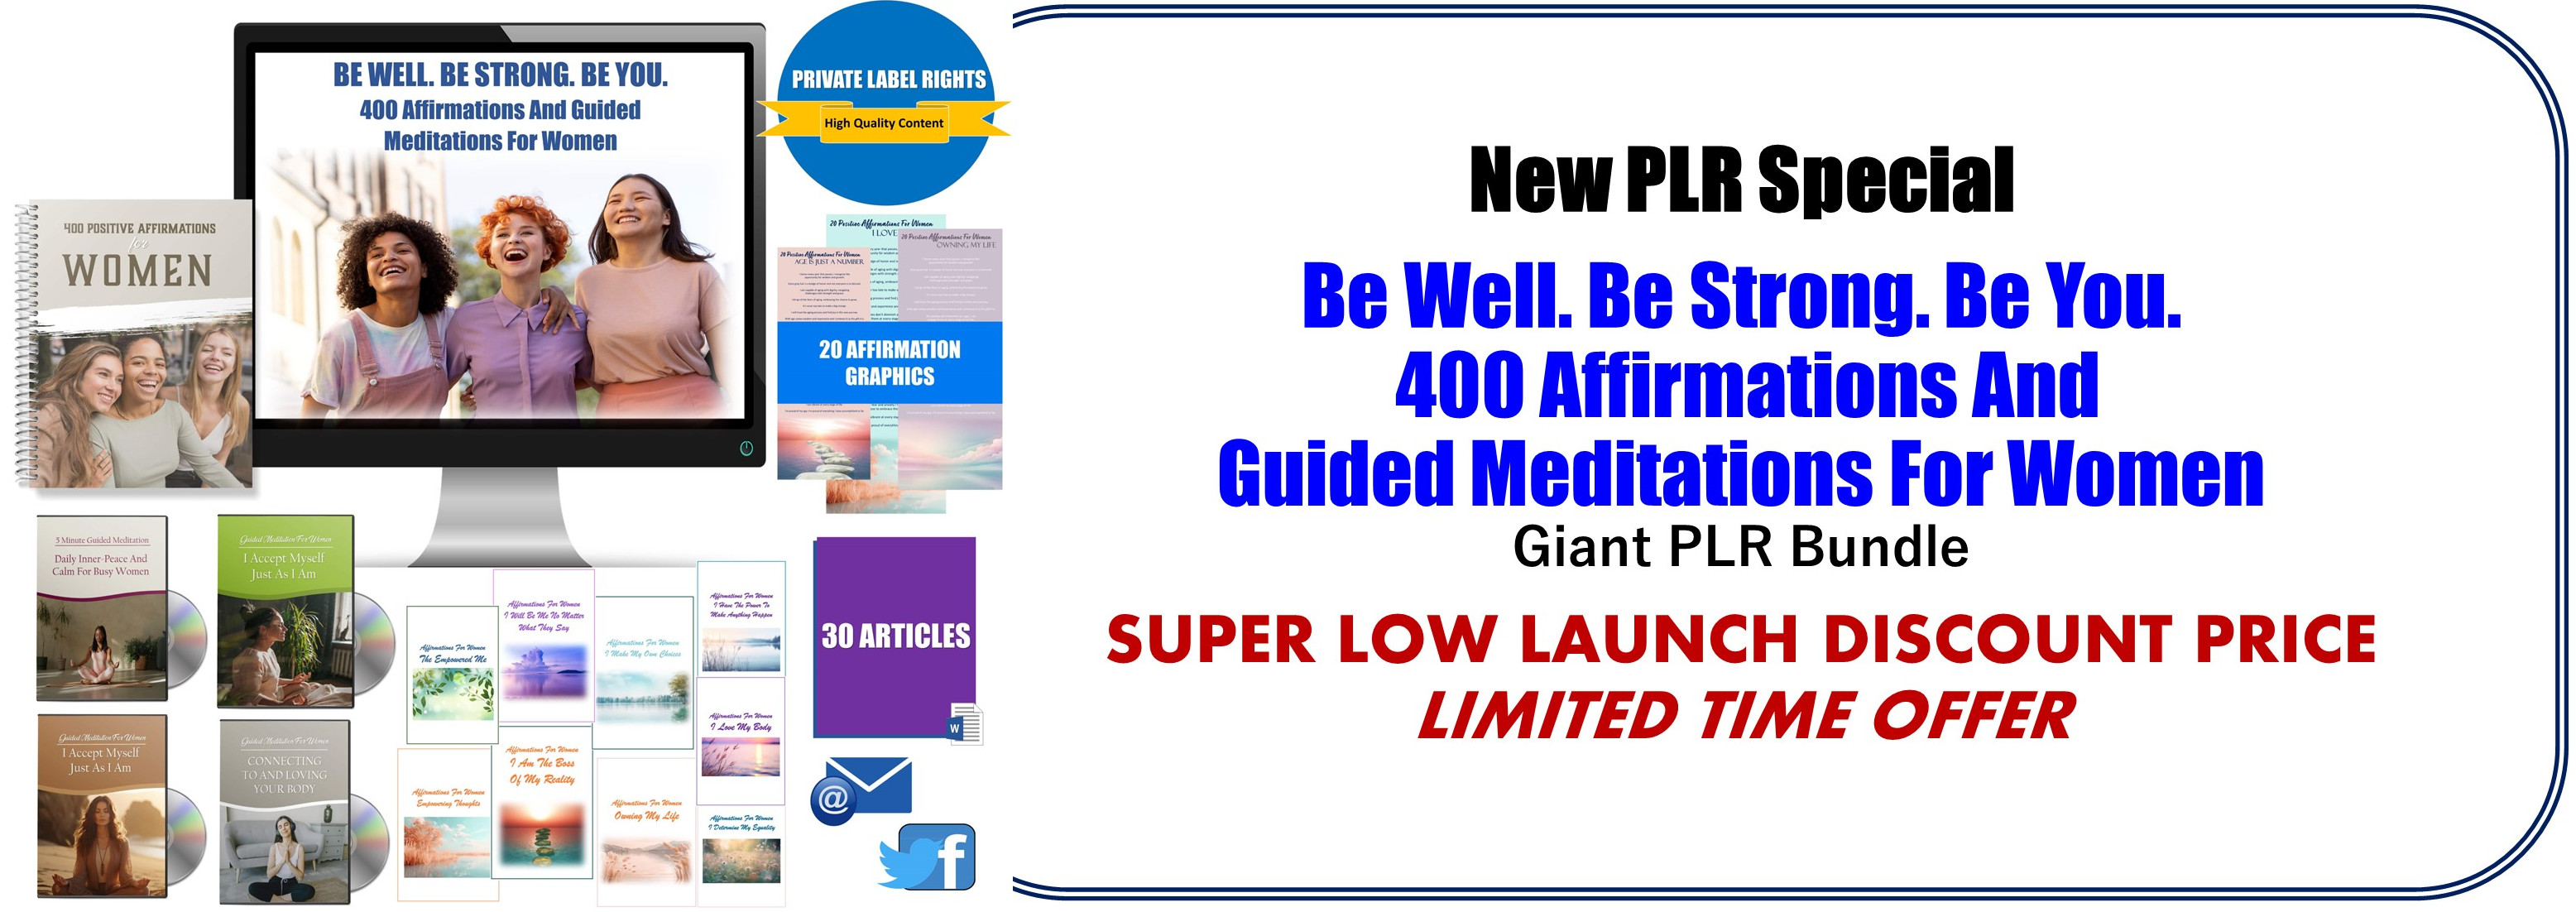 Weight Loss Success - 340 Positive Affirmations And Guided Meditations Giant PLR